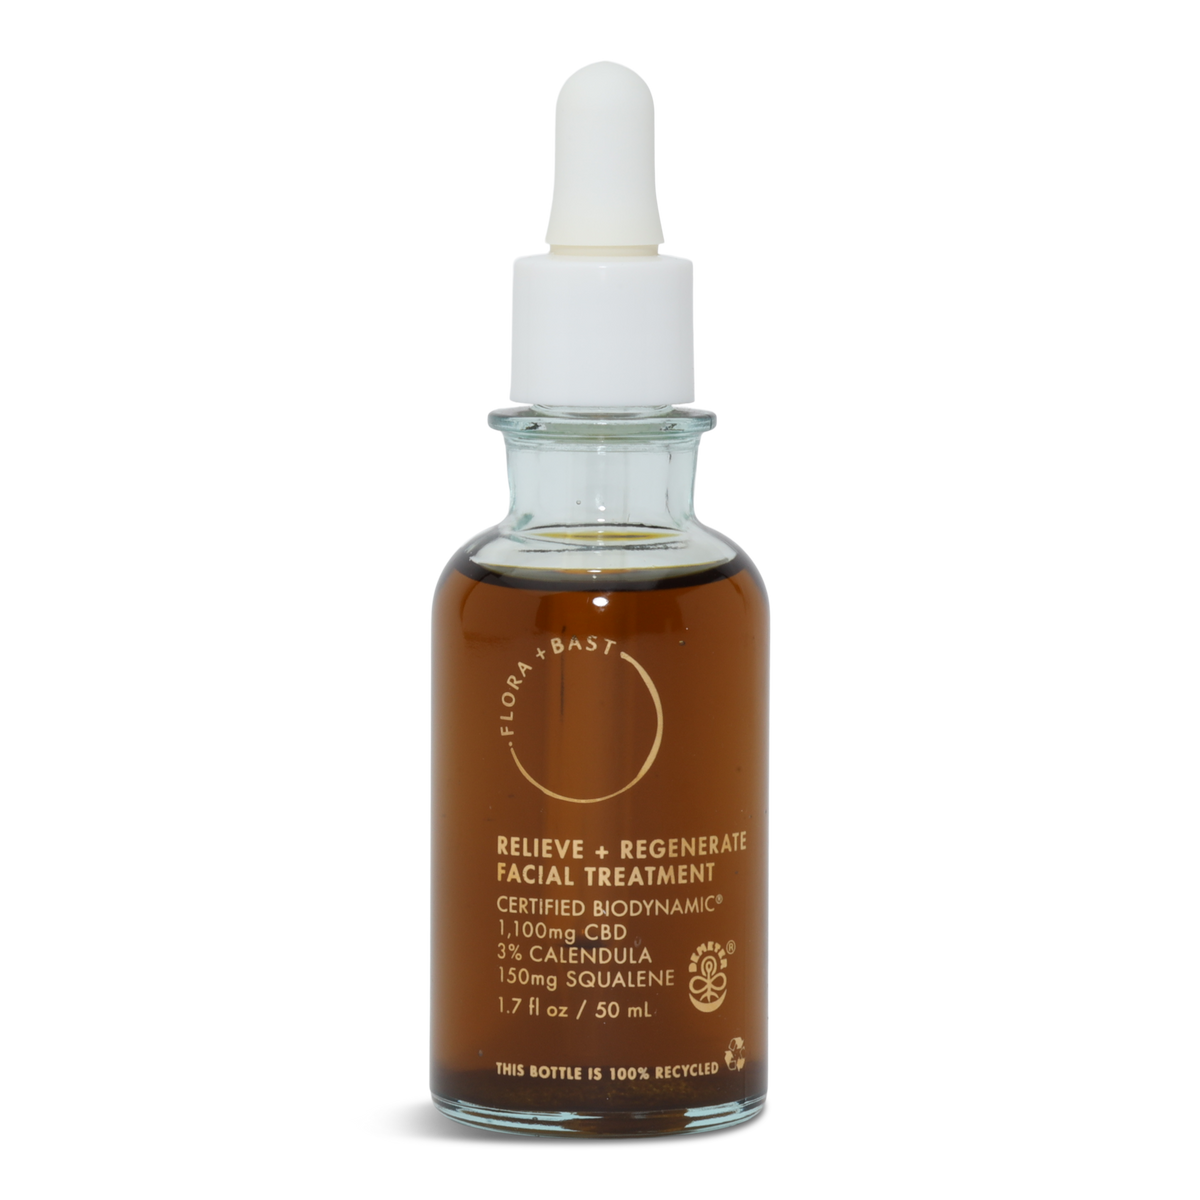 A healing face oil for the most irritated skin, packed with CBD and calendula